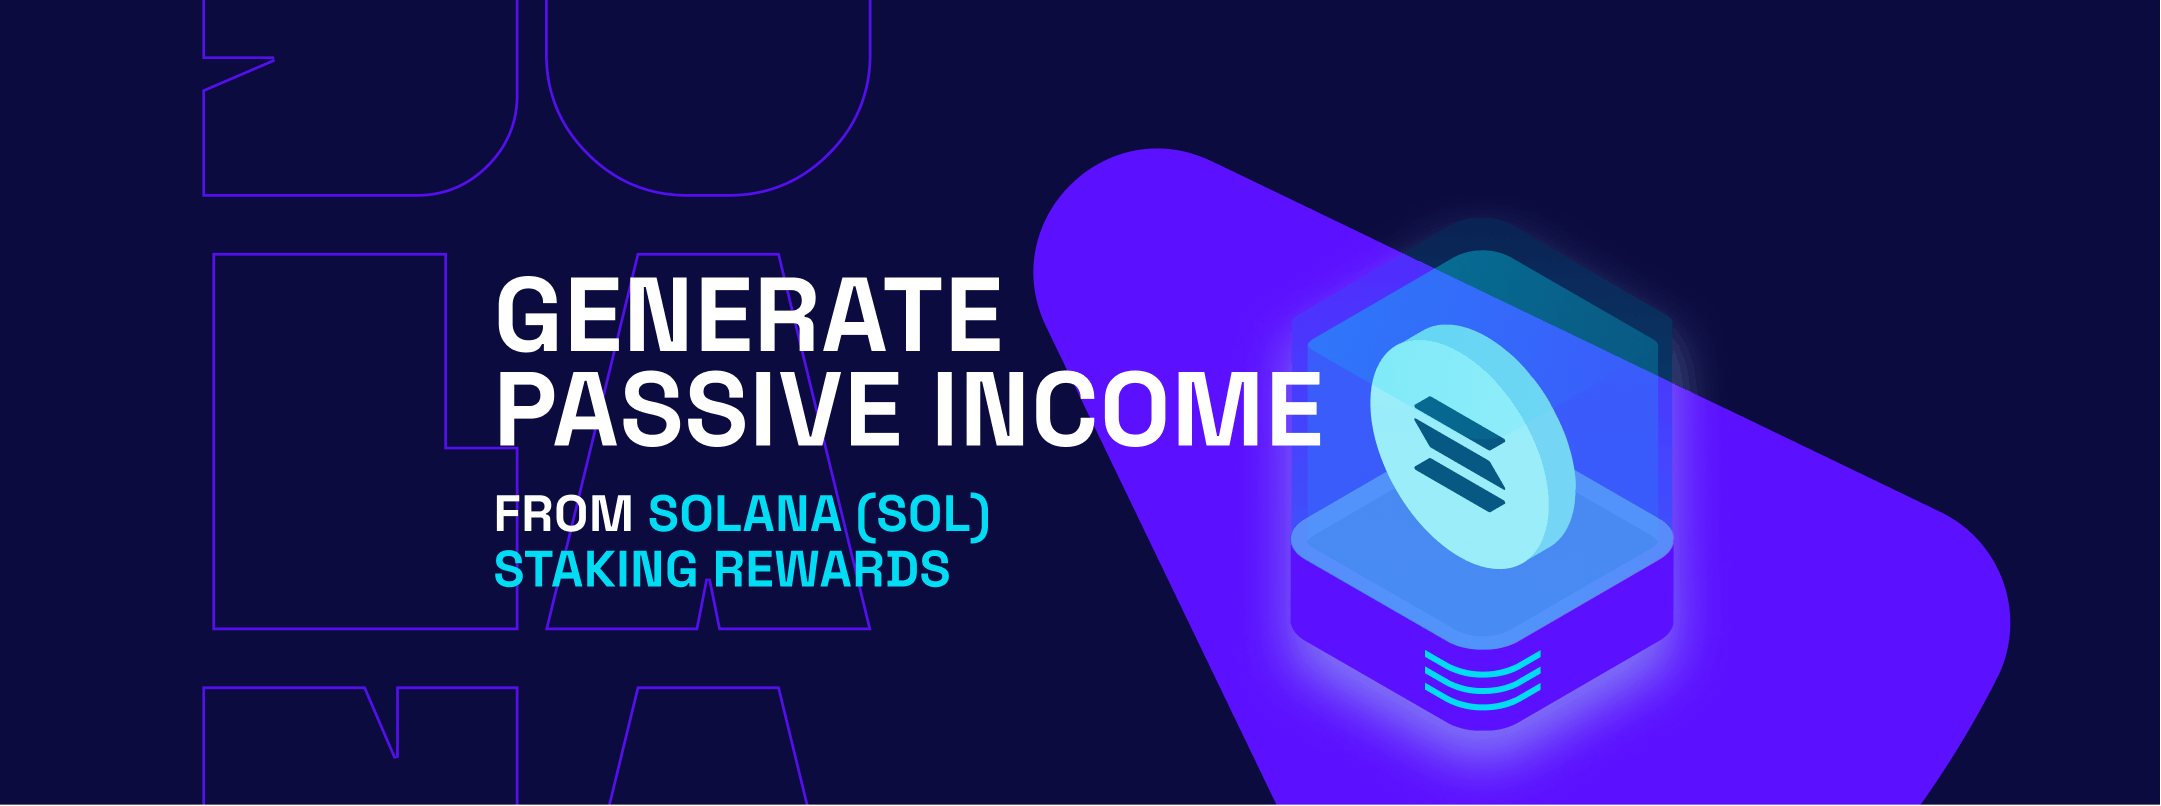 Generate Passive Income from Solana (SOL) Staking Rewards